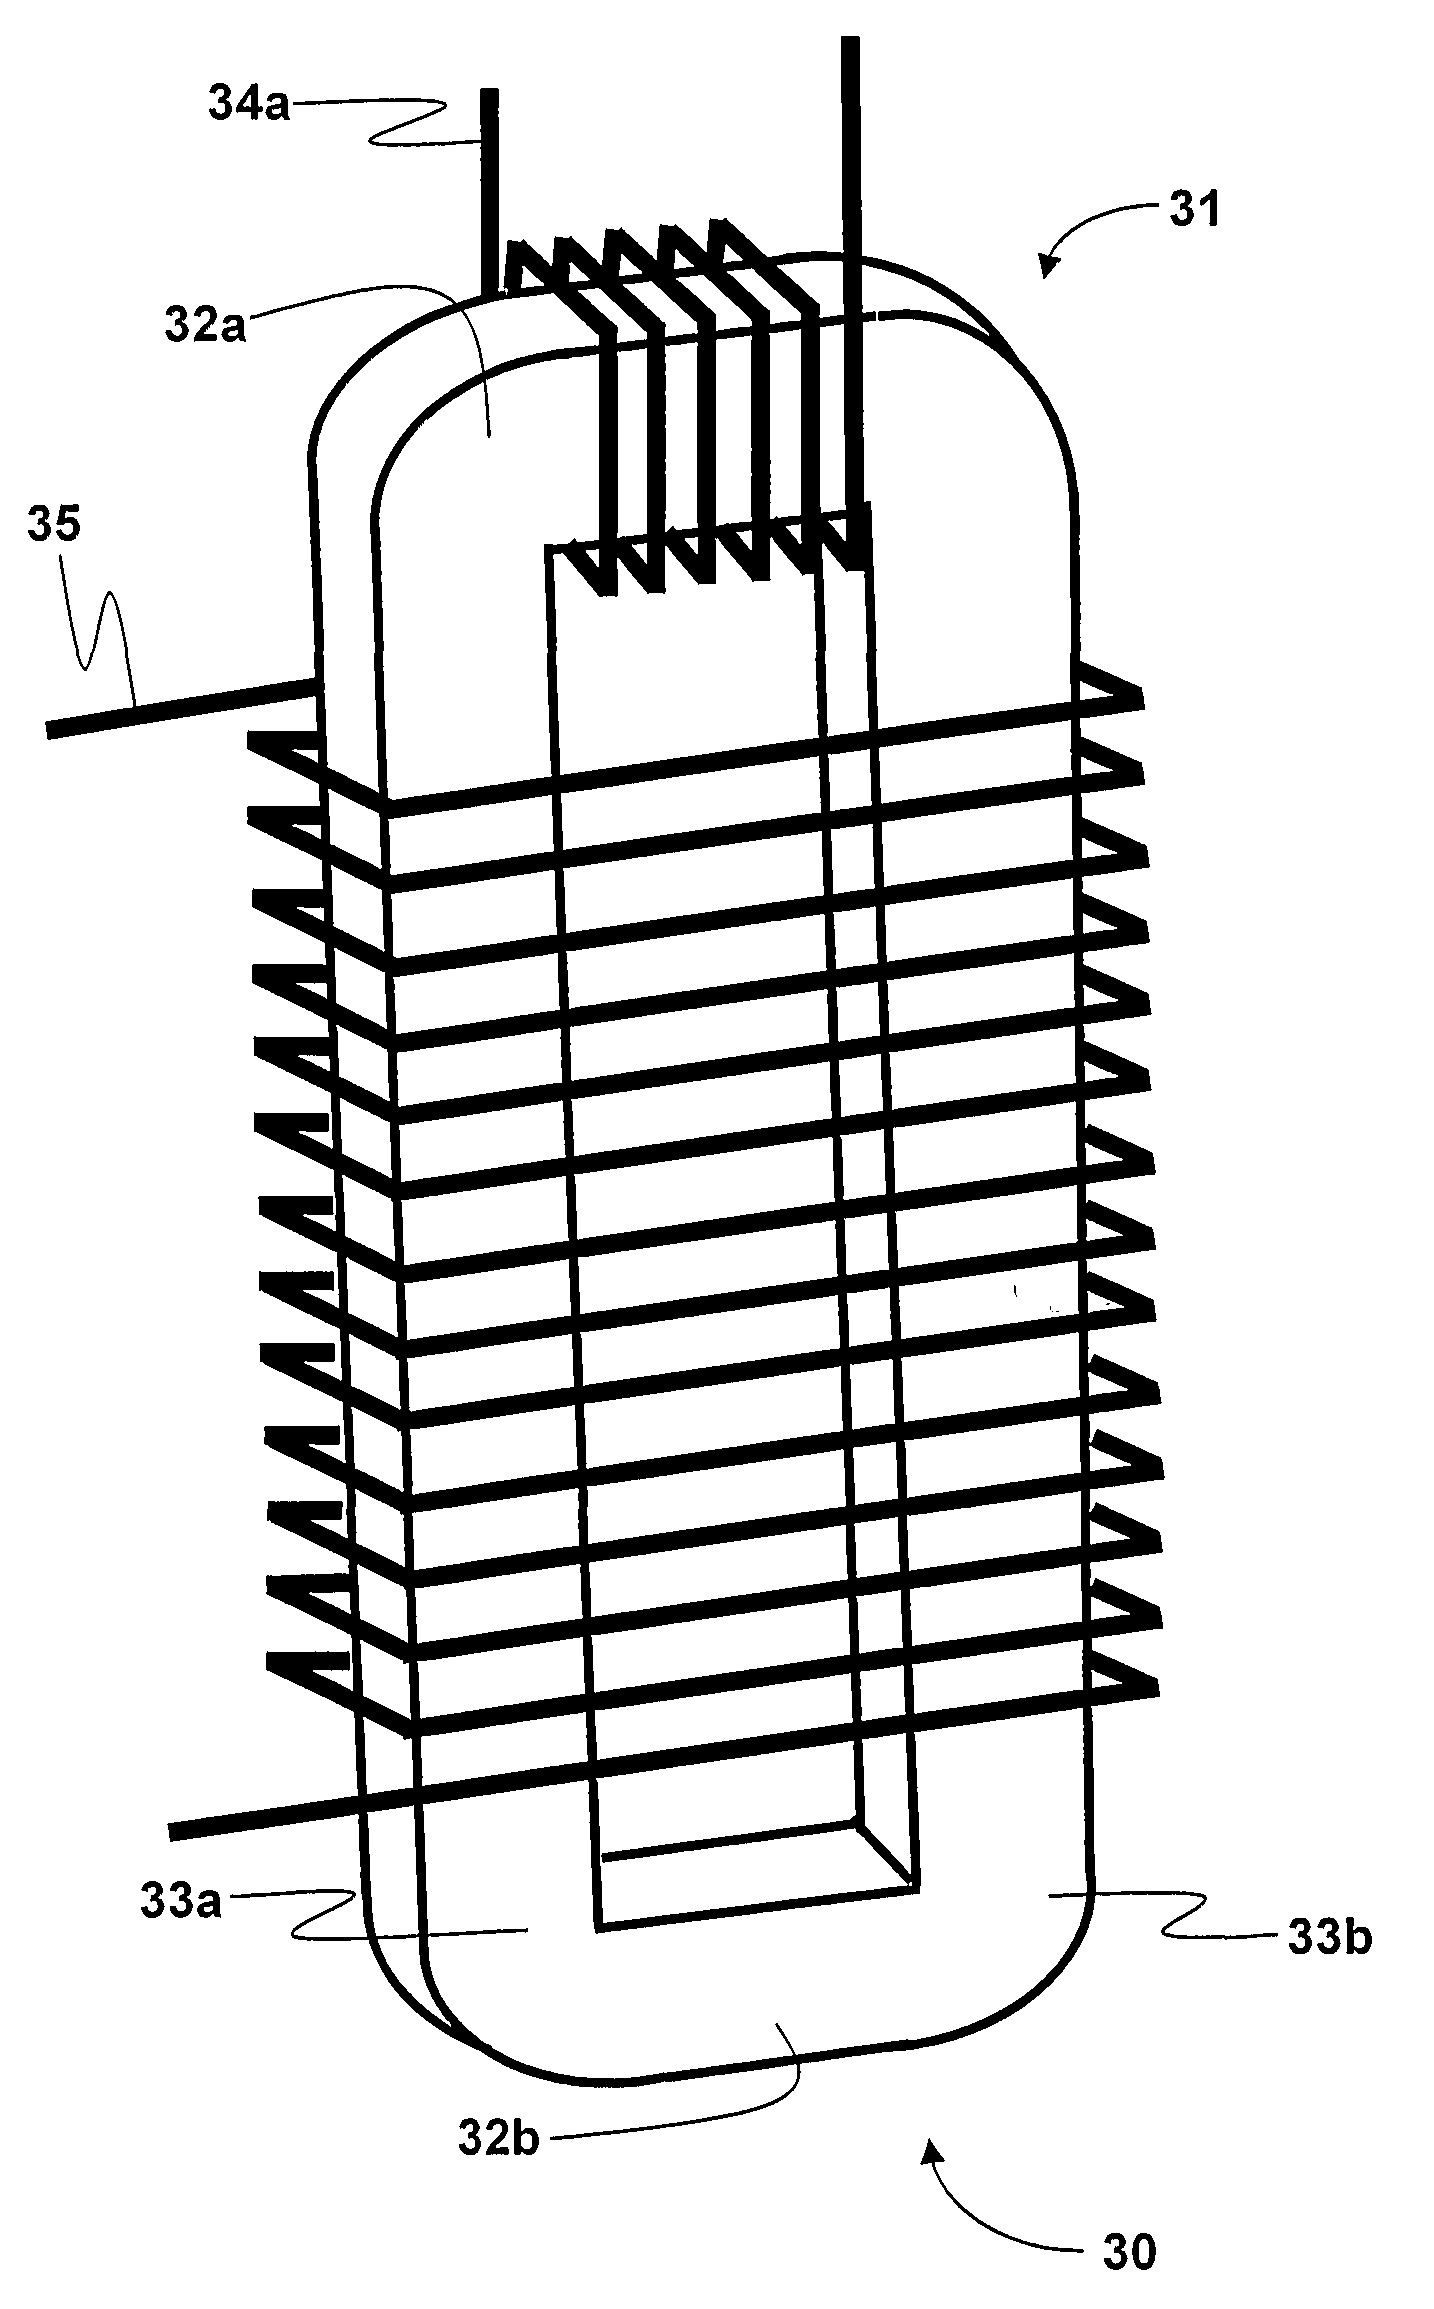 Fault current limiters (FCL) with the cores saturated by superconducting coils